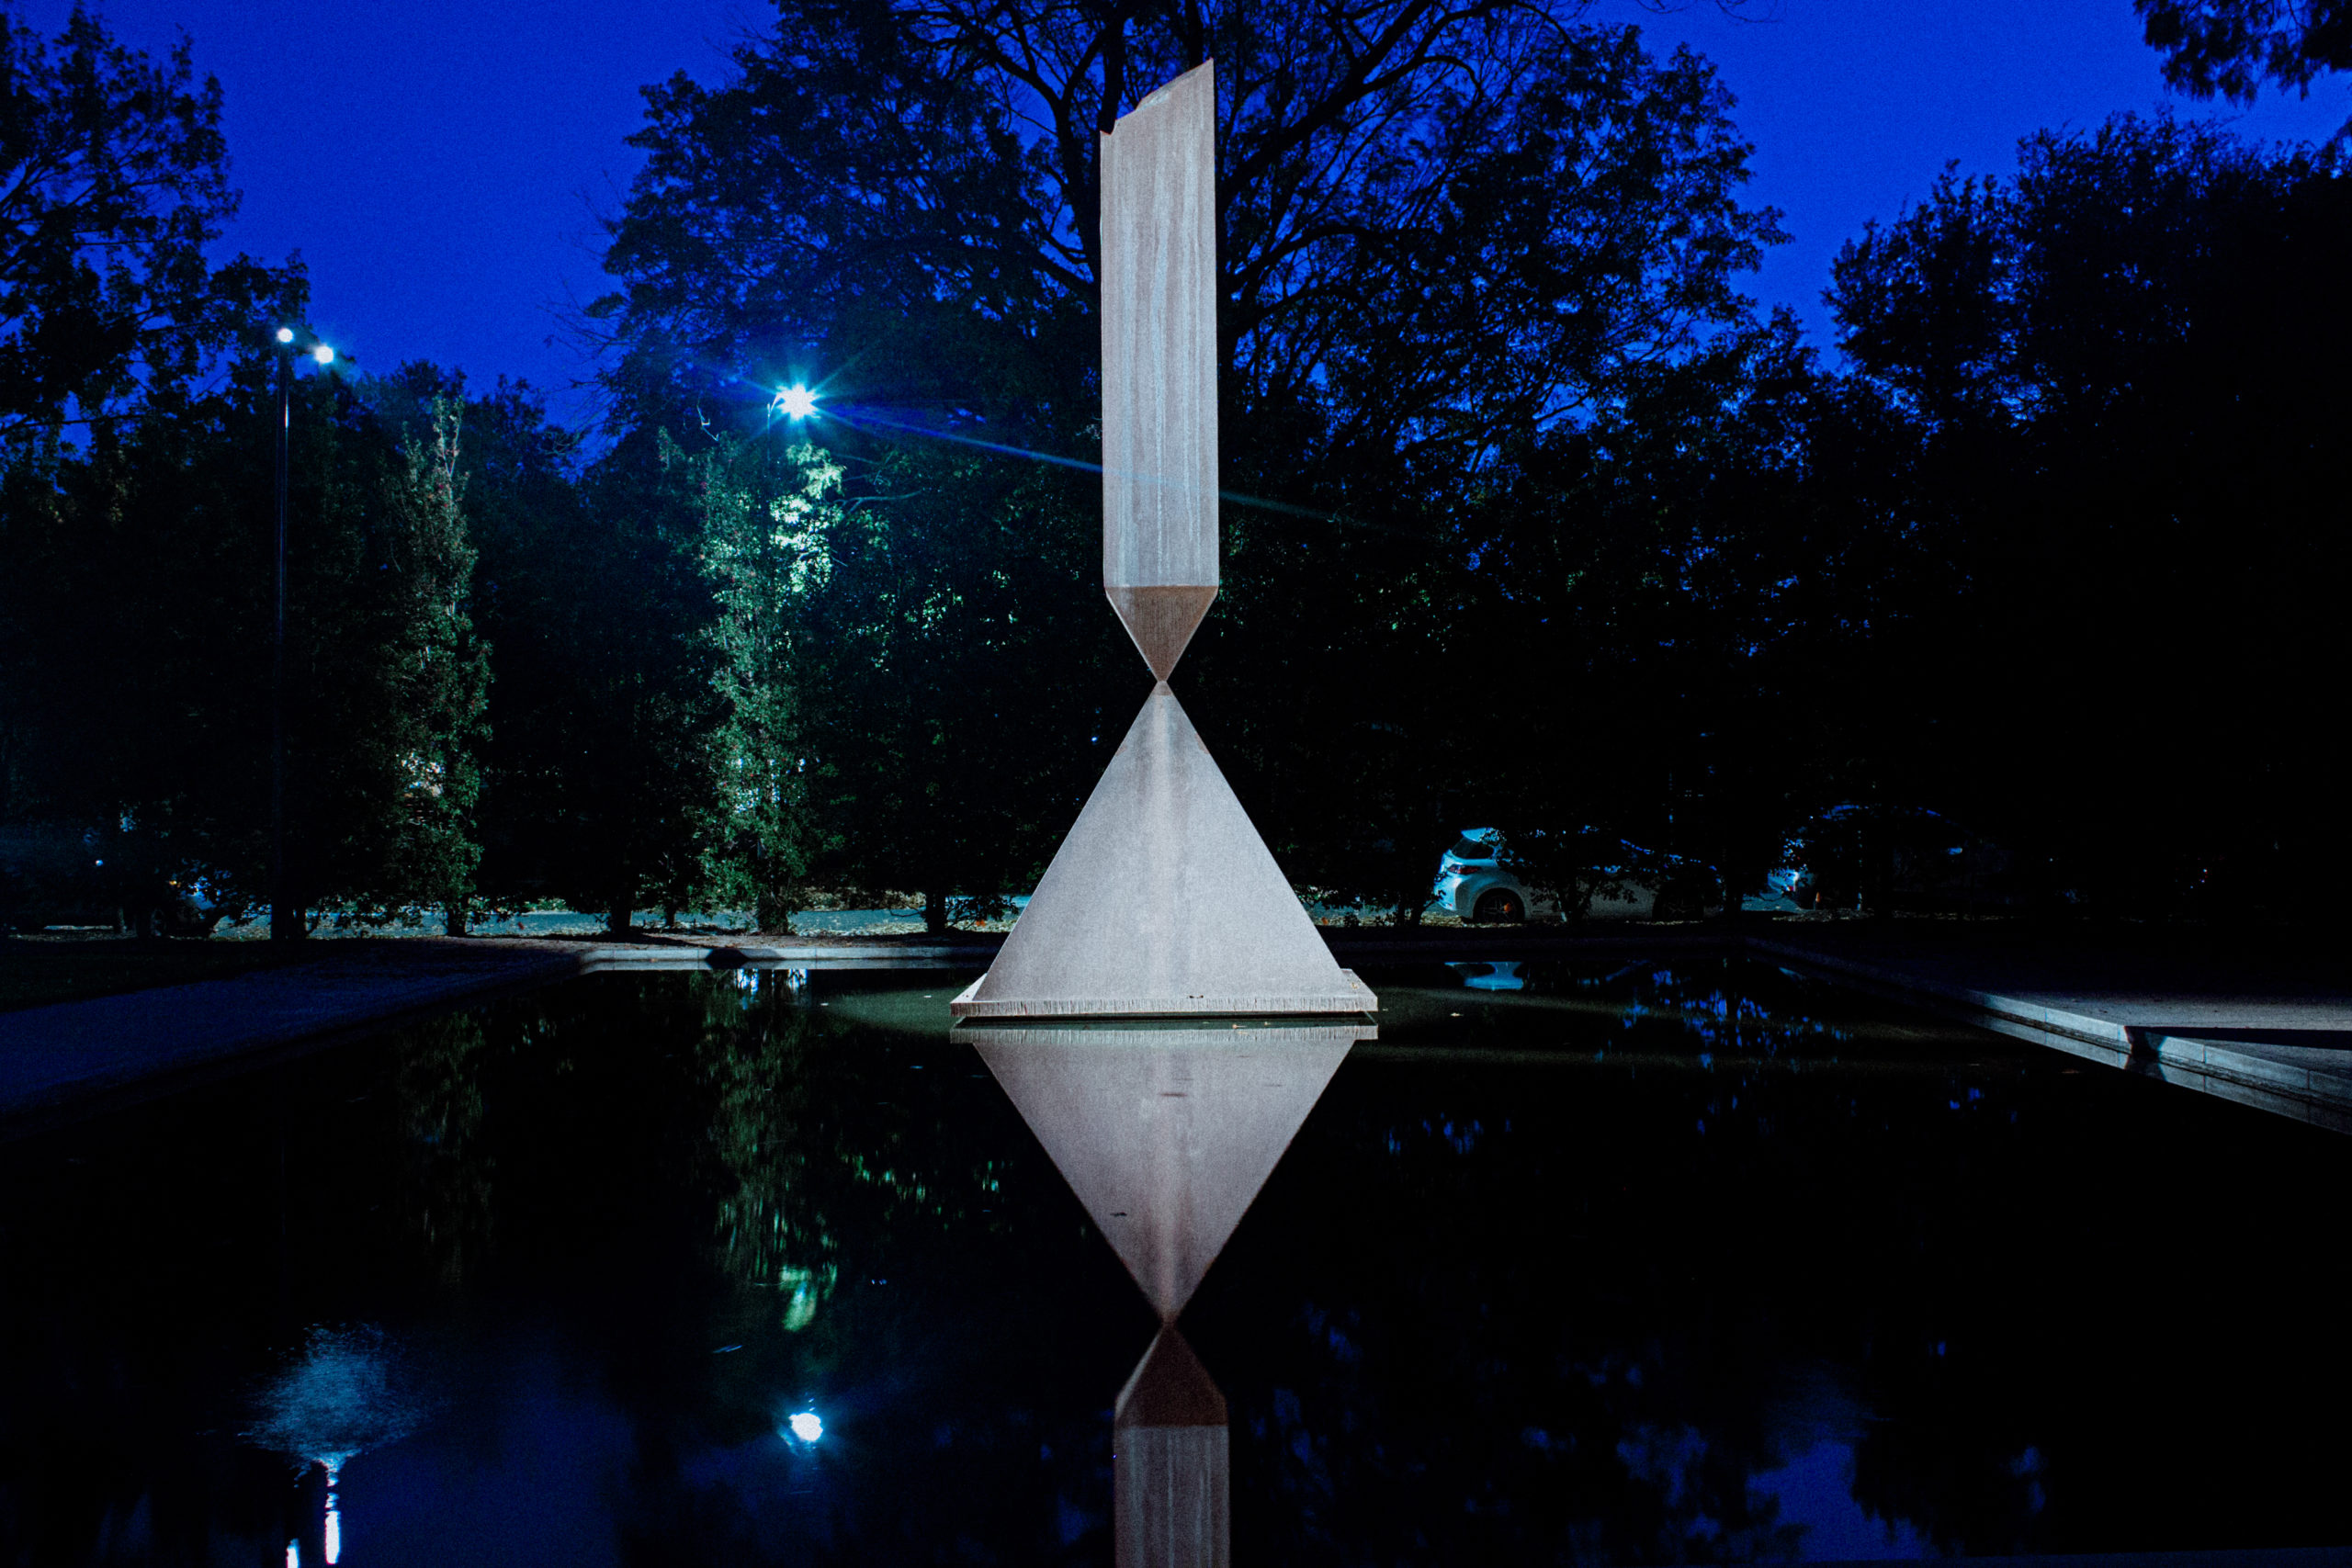 This sculpture, outside the Rothko Chapel, features a broken obelisk balancing on its point upon a pyramid of granite, placed in a lit reflecting pool surrounded by trees.